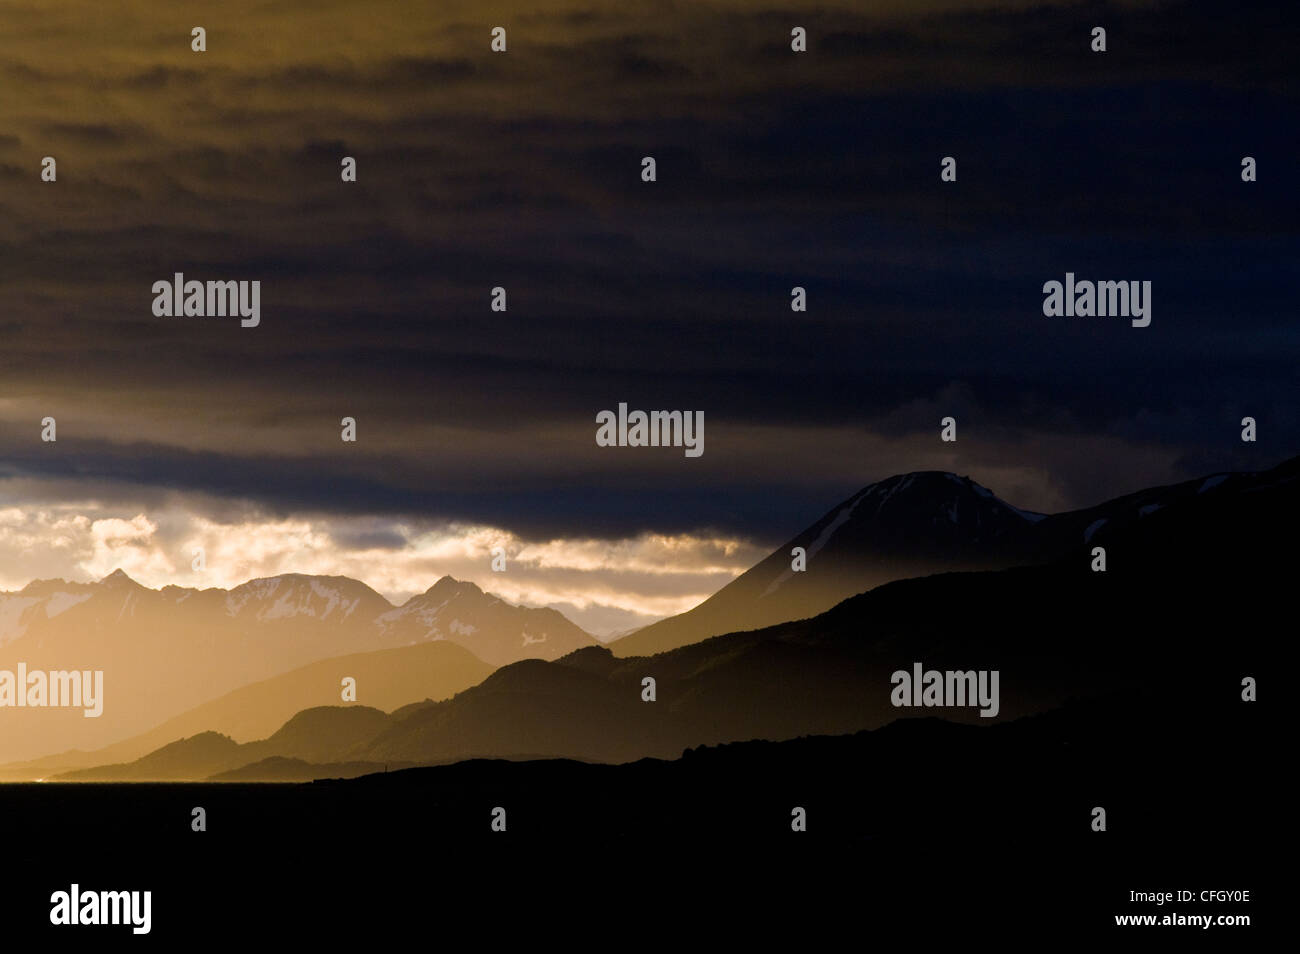 Sun rays pierce a dark menacing storm bank over the Andes mountains. Stock Photo